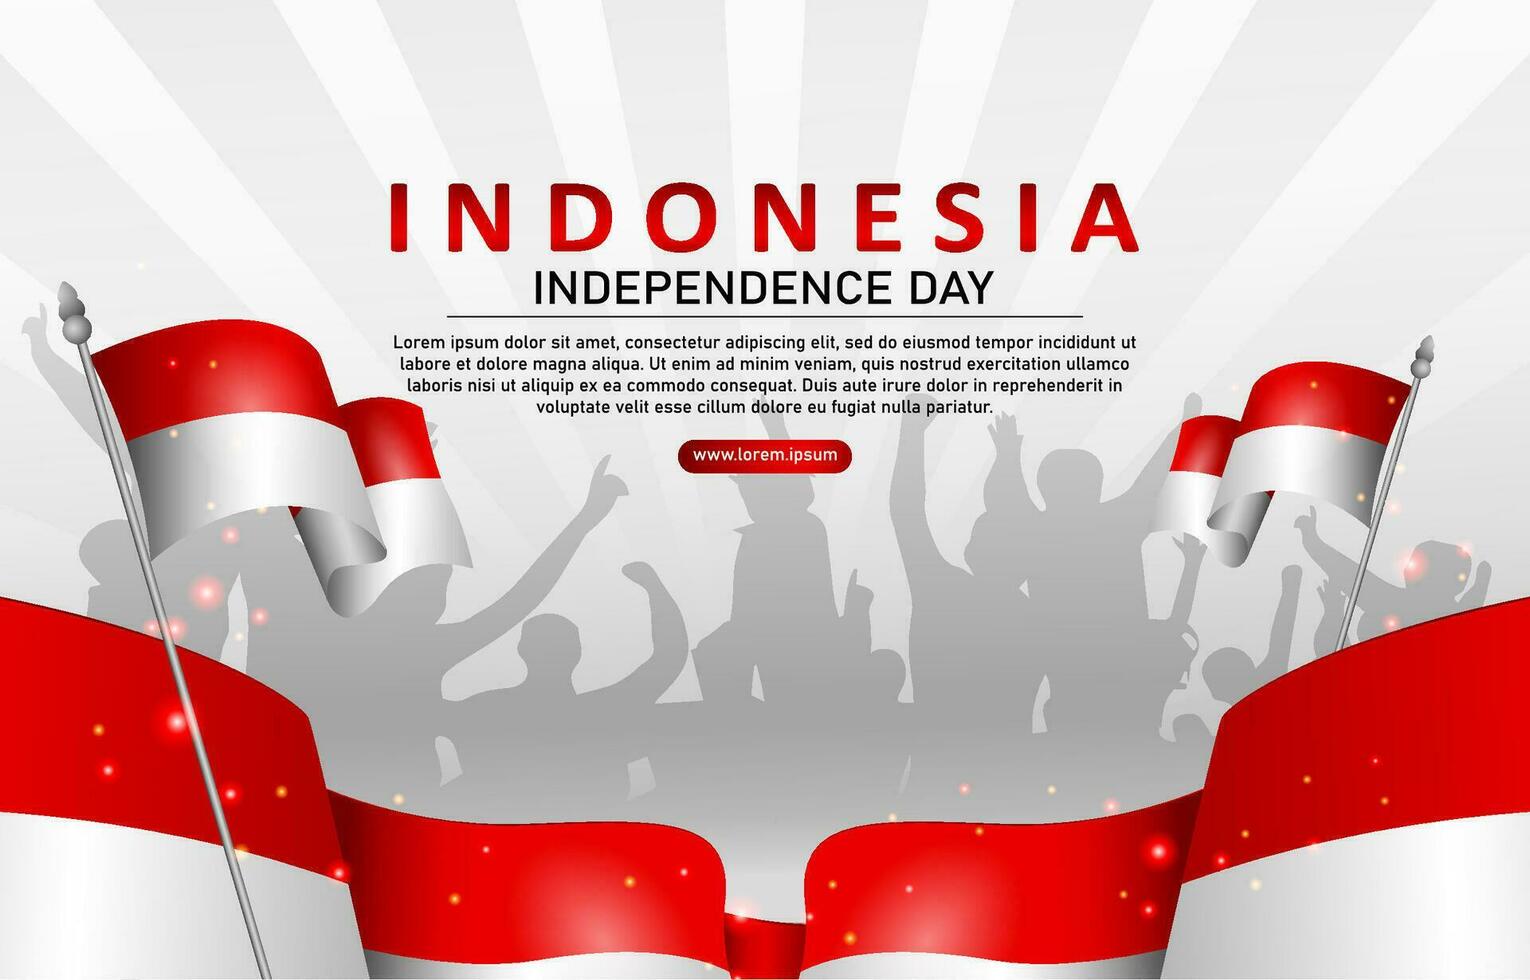 Indonesia independence day background vector